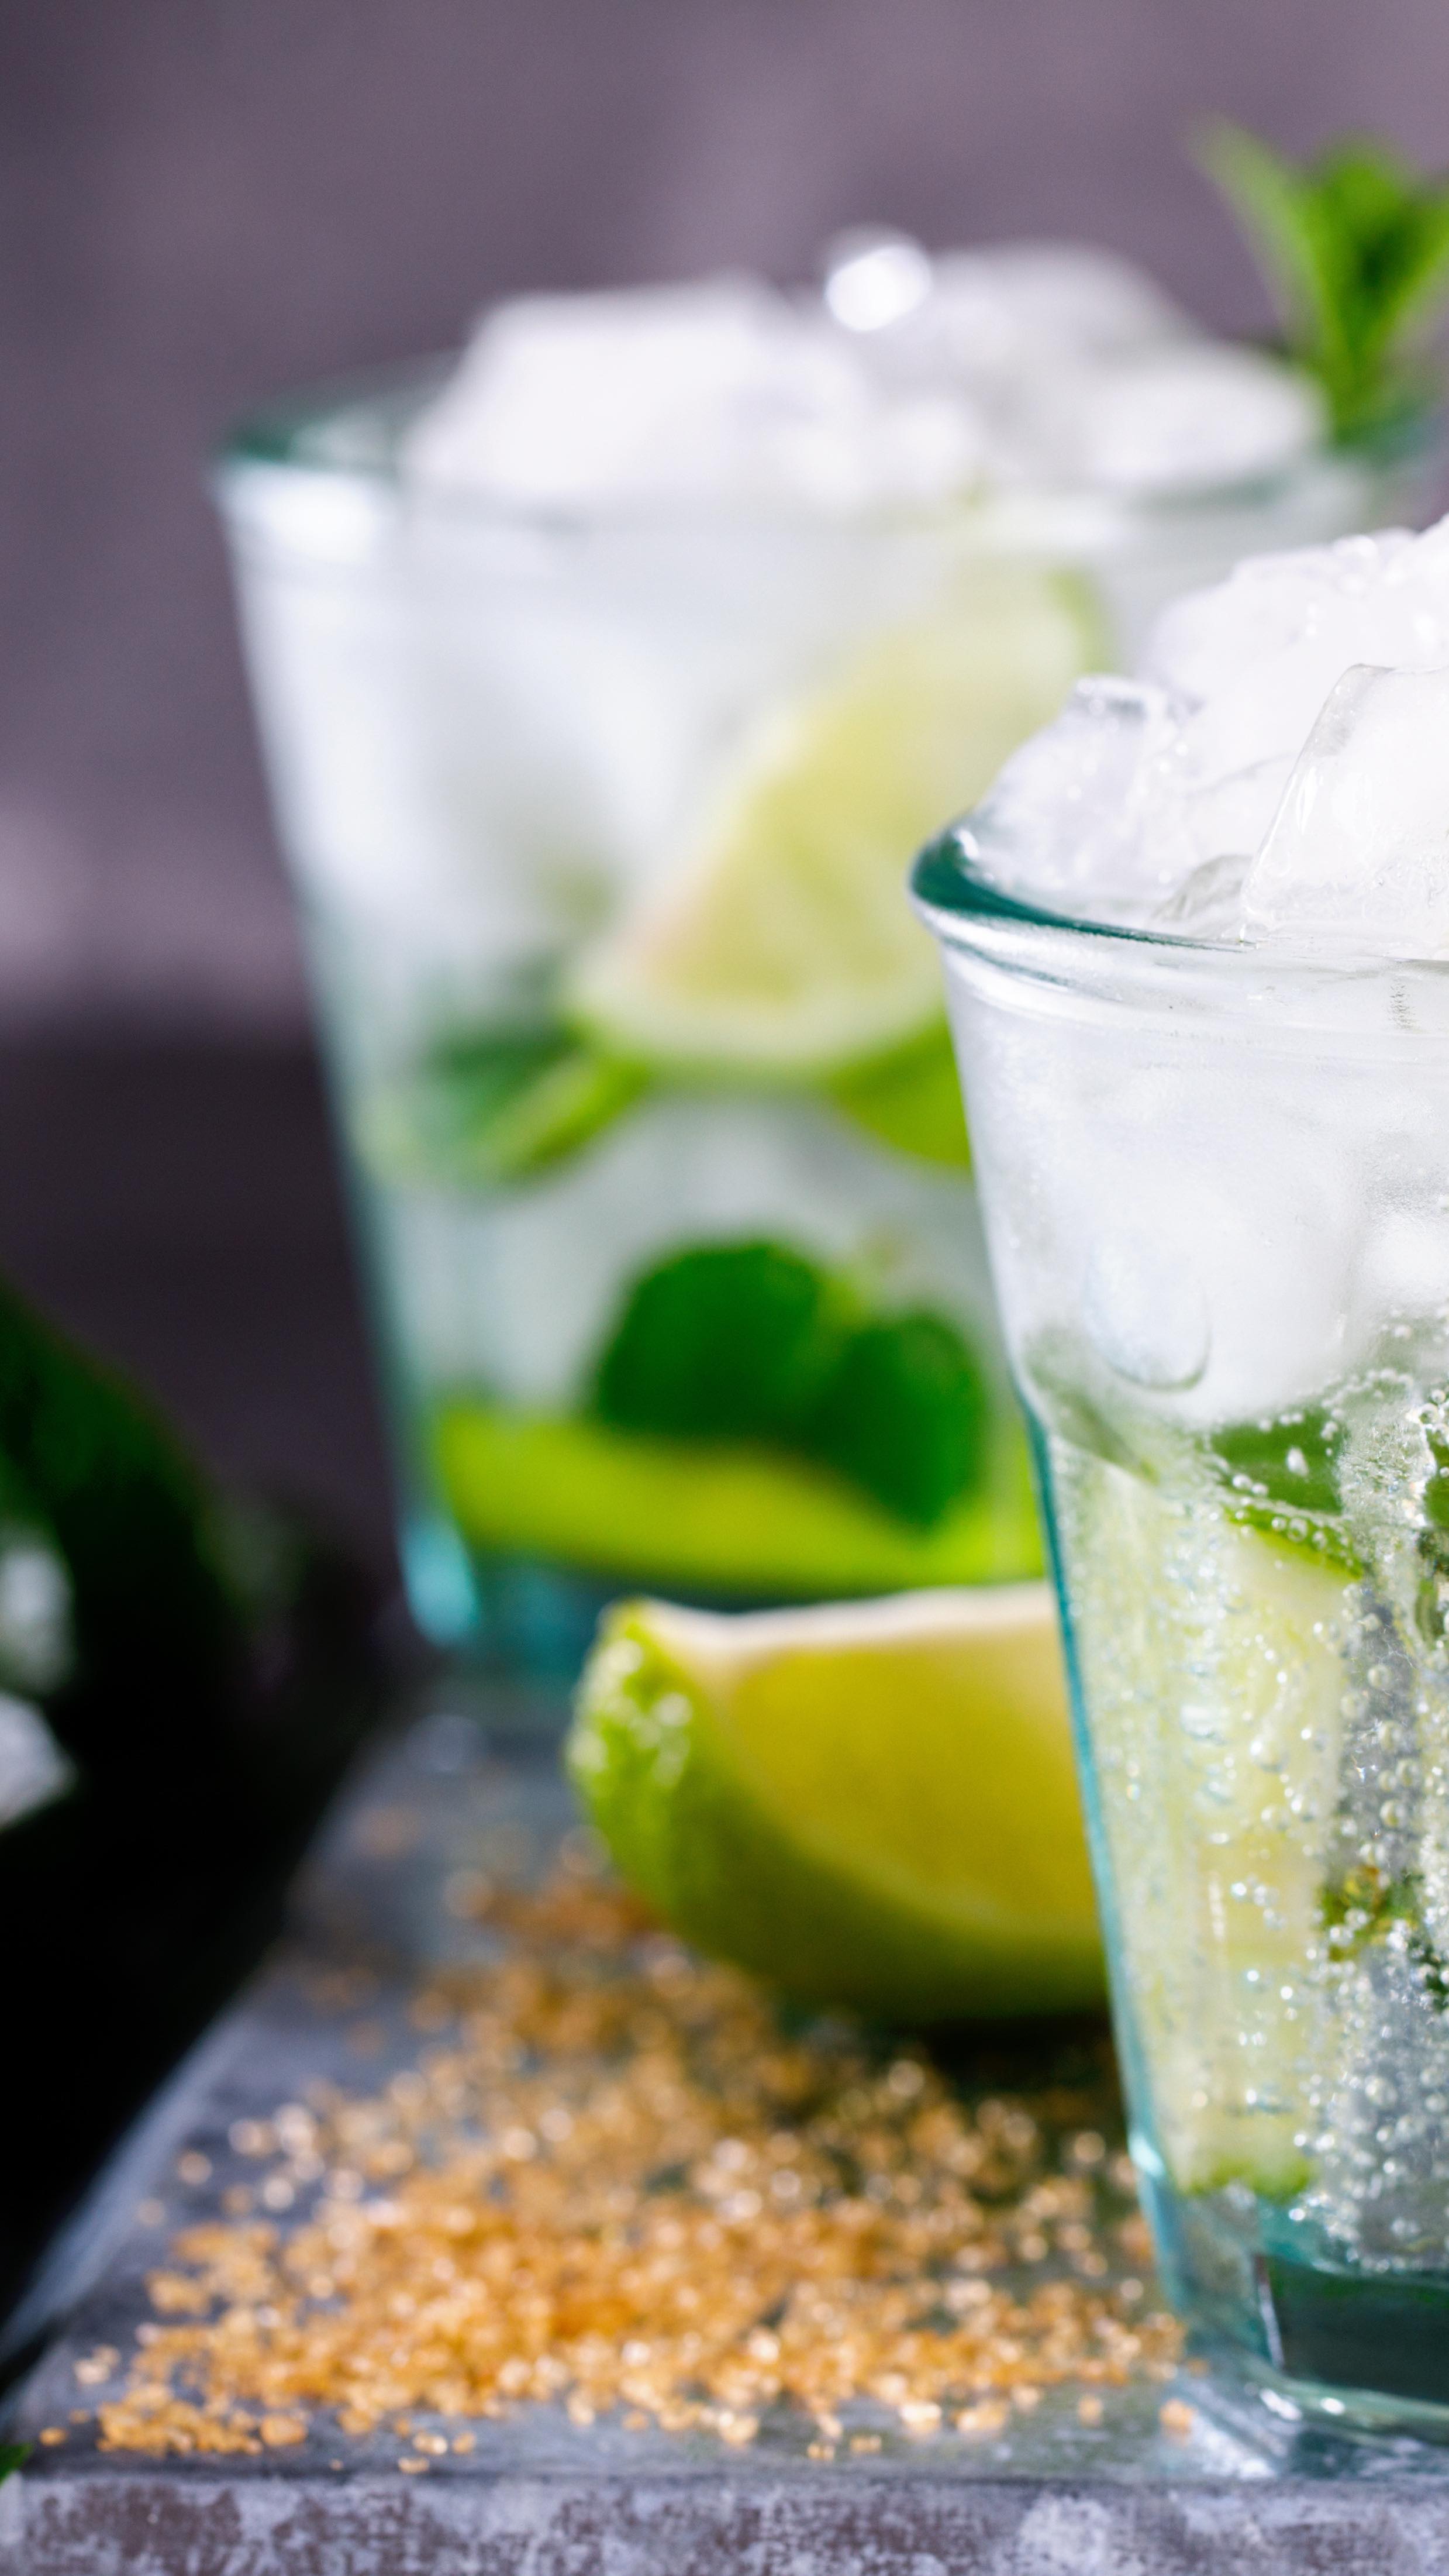 The Classic Mojito

The Mojito is considered Cuba’s national drink and one of the world’s most popular cocktails. Cool and crisp, it pairs perfectly with a warm summer night.

#mojito#mojitos#mixology#mixologist#cocktail#cocktails#alcohol#alcoholicdrinks